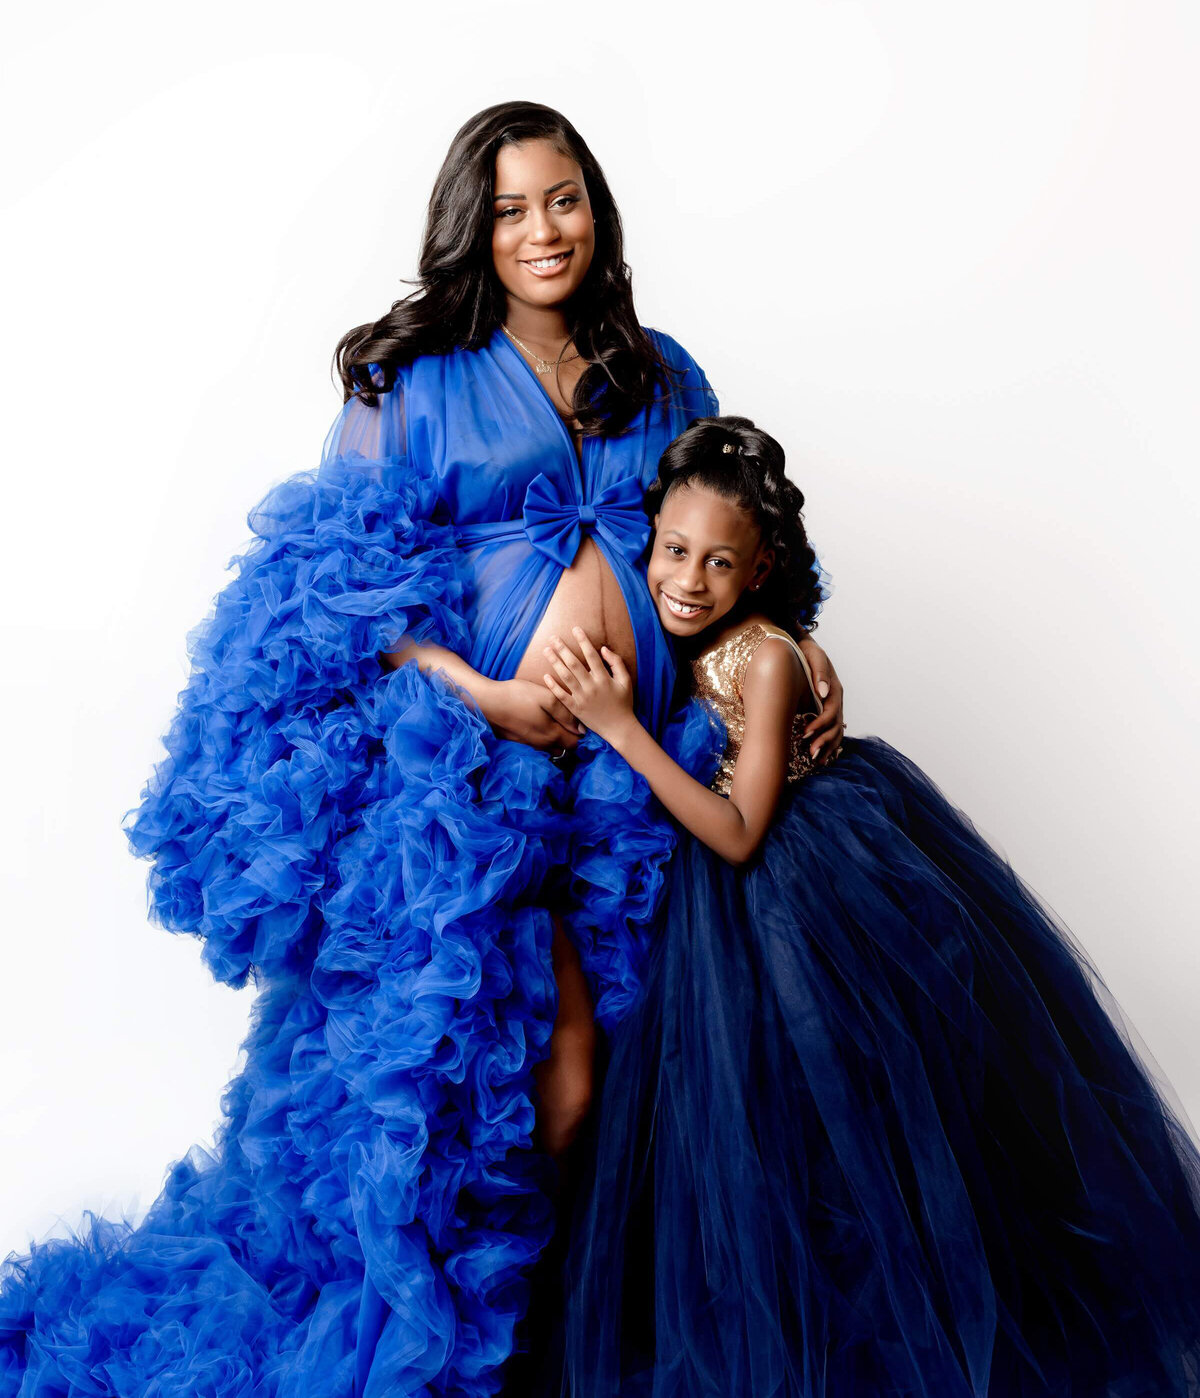 A mother and daughter pose together in a maternity studio photo shoot. The mother, with her baby bump proudly displayed, lovingly embraces her daughter.